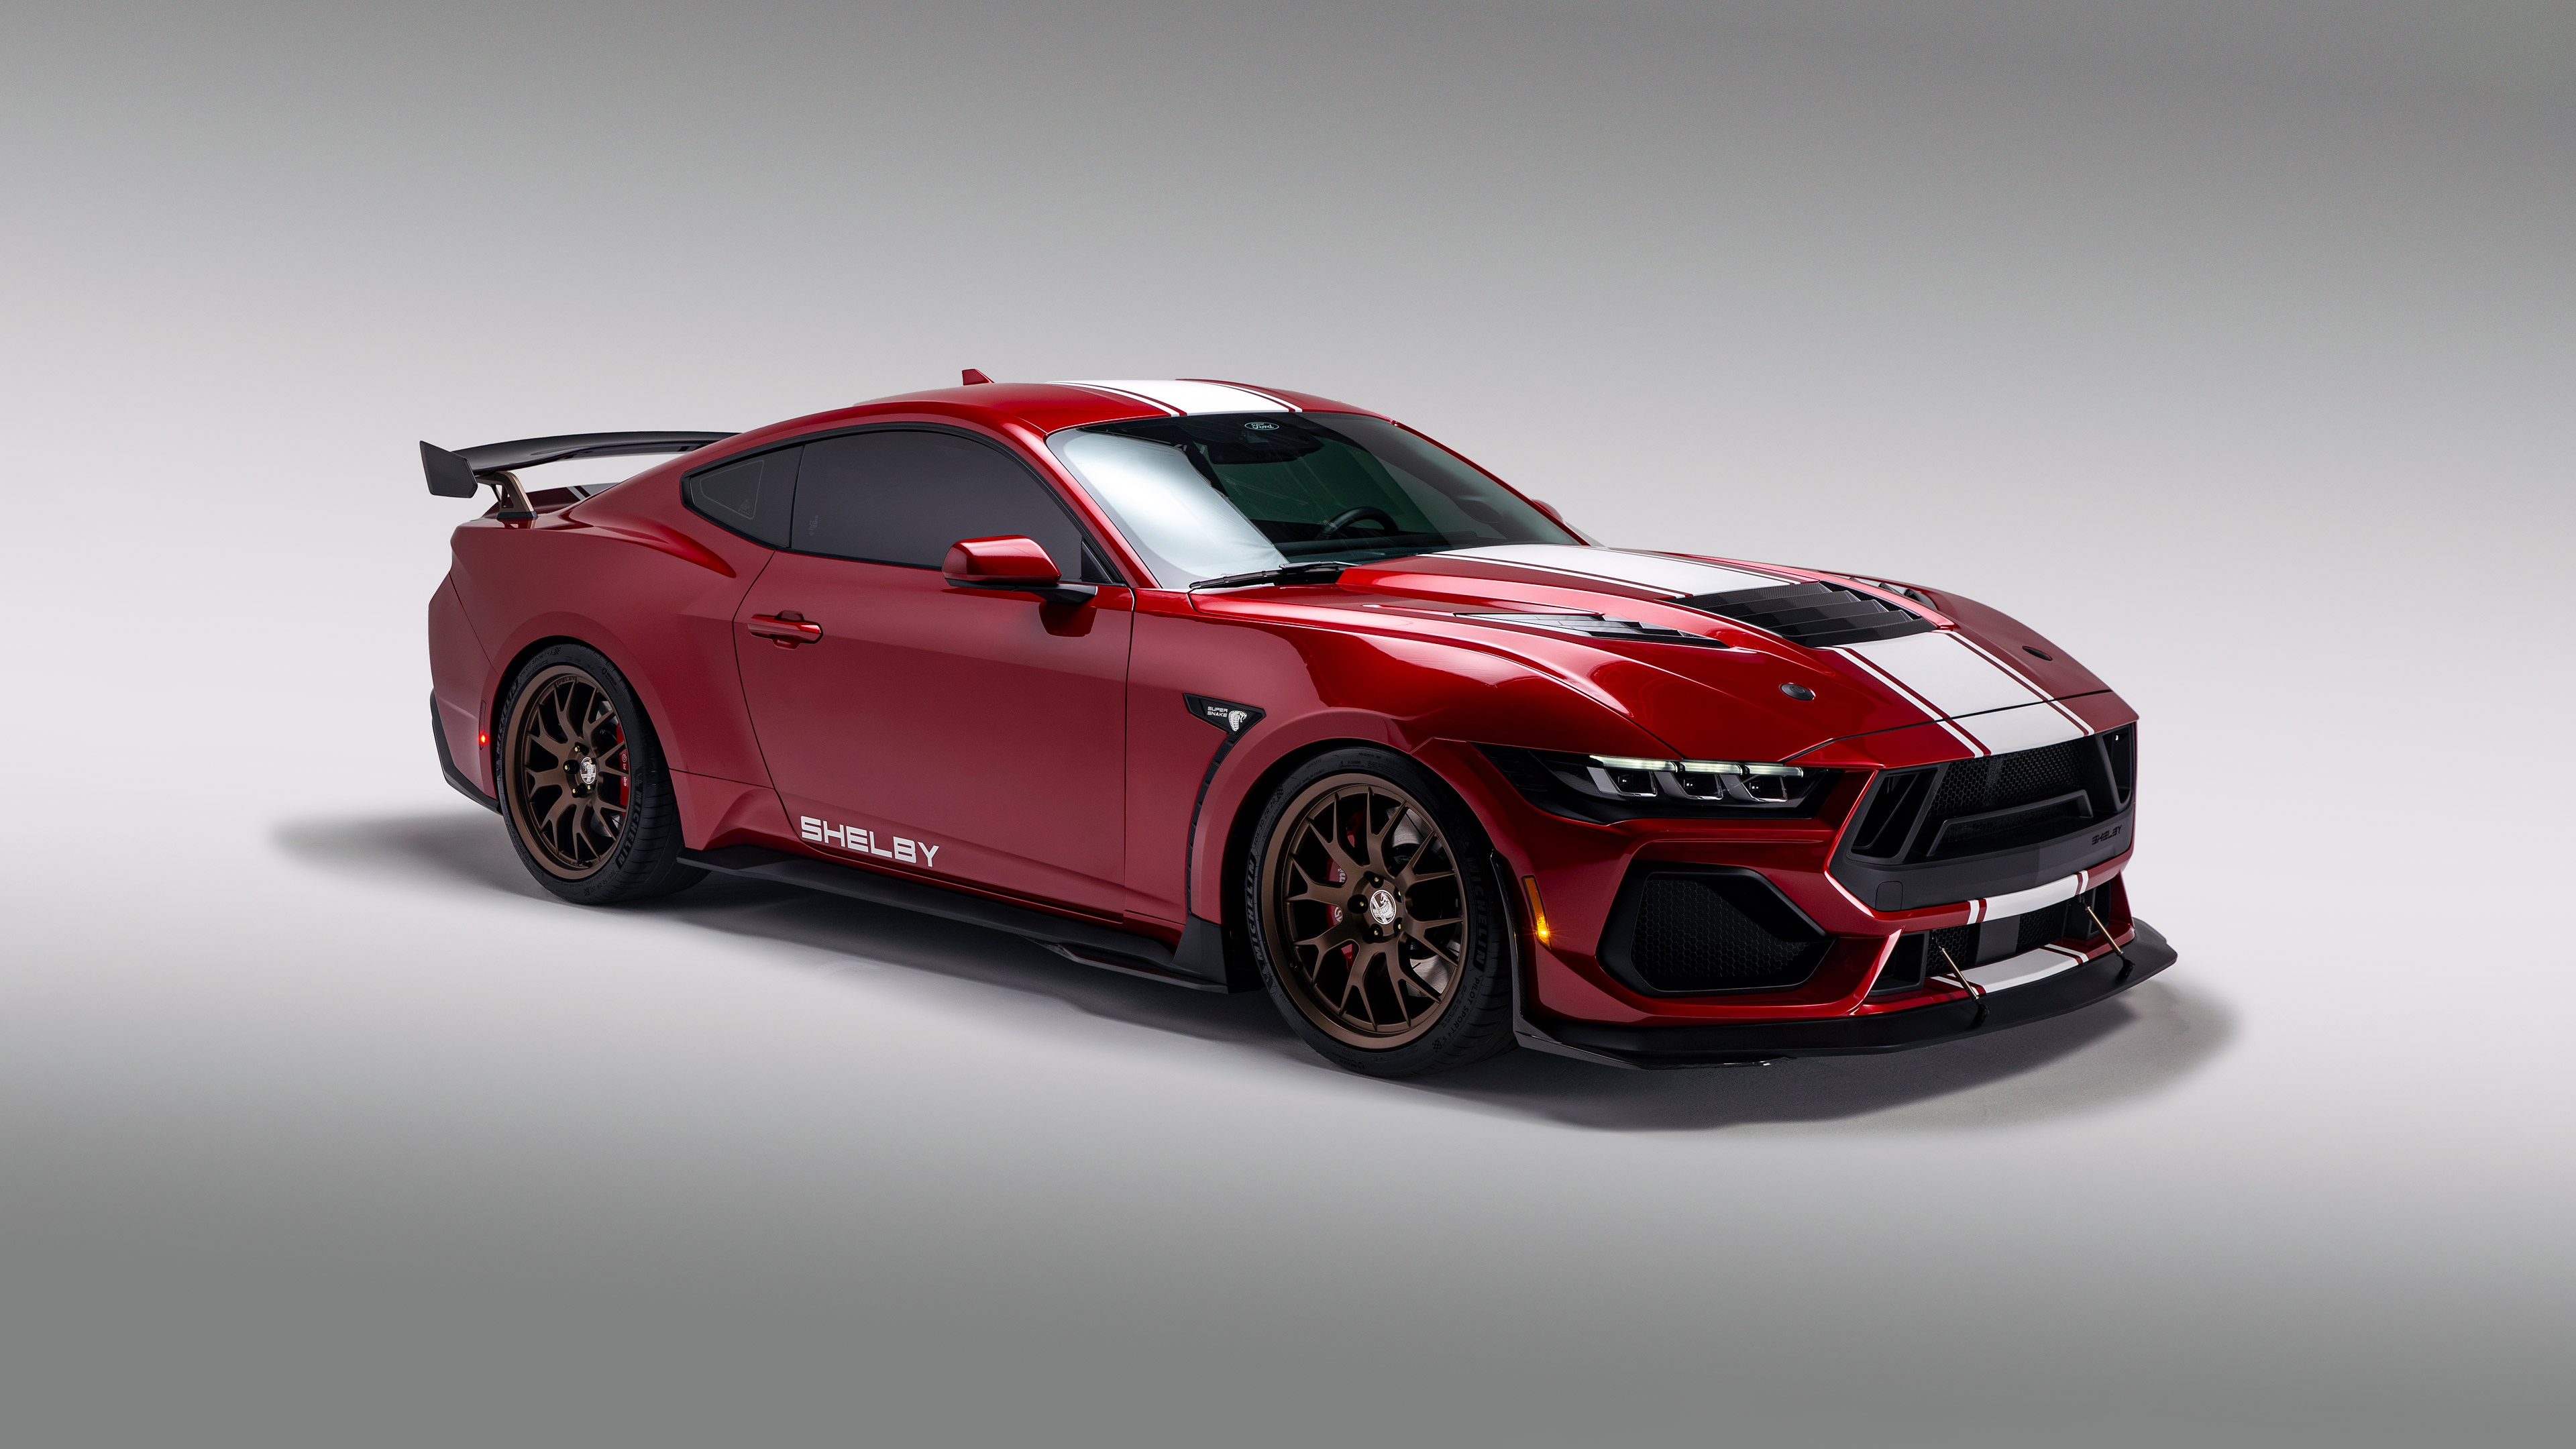 Ford Mustang Shelby Shelby Ford Mustang Red Cars Car Muscle Cars Simple Background 3840x2160